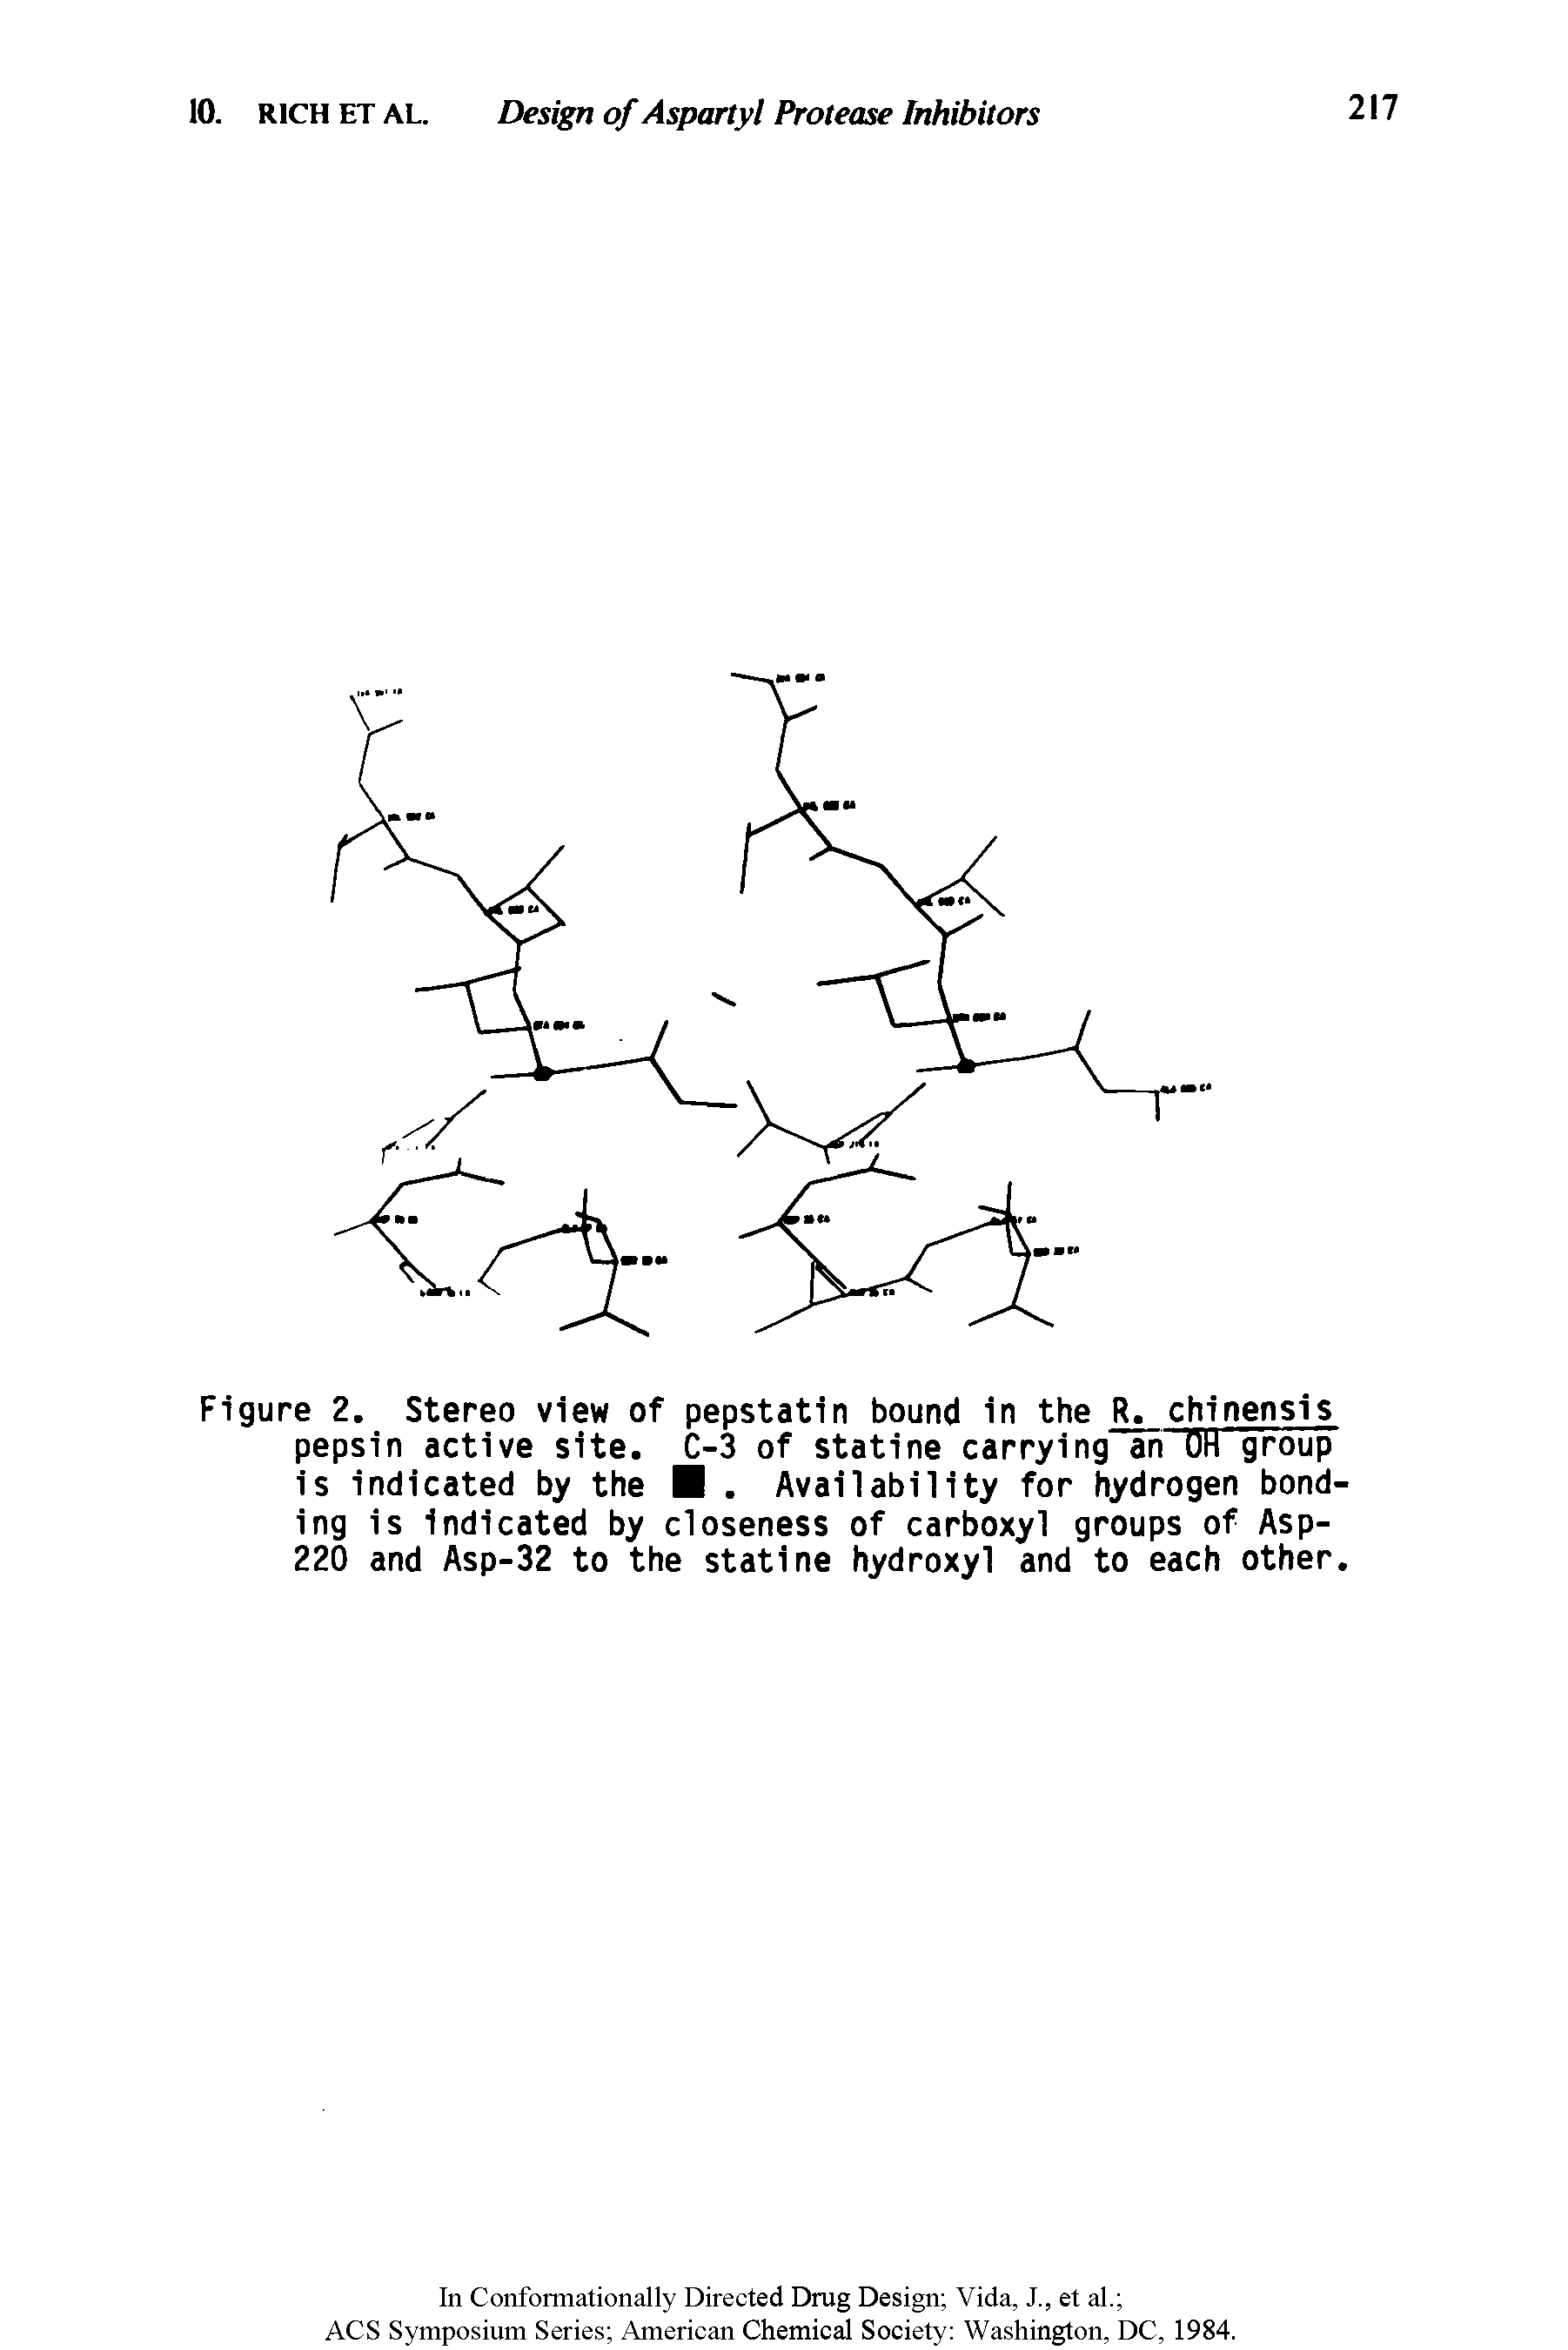 Figure 2. Stereo view of pepstatin bound in the R. chinensis pepsin active site. C-3 of statine carrying an OH group is indicated by the . Availability for hydrogen bonding is indicated by closeness of carboxyl groups of Asp-220 and Asp-32 to the statine hydroxyl and to each other.